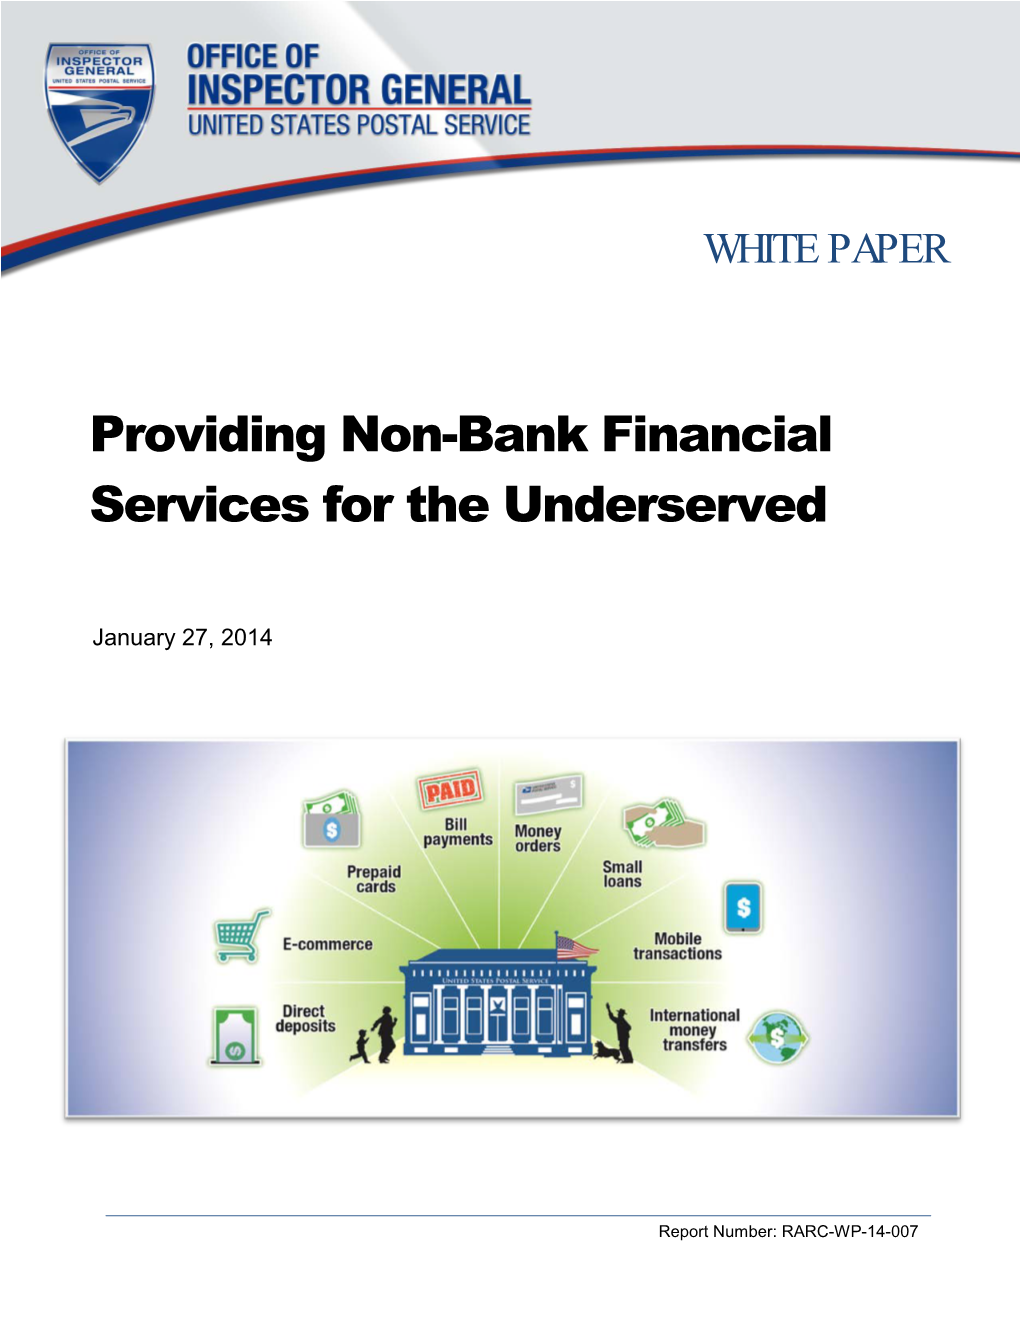 Providing Non-Bank Financial Services for the Underserved